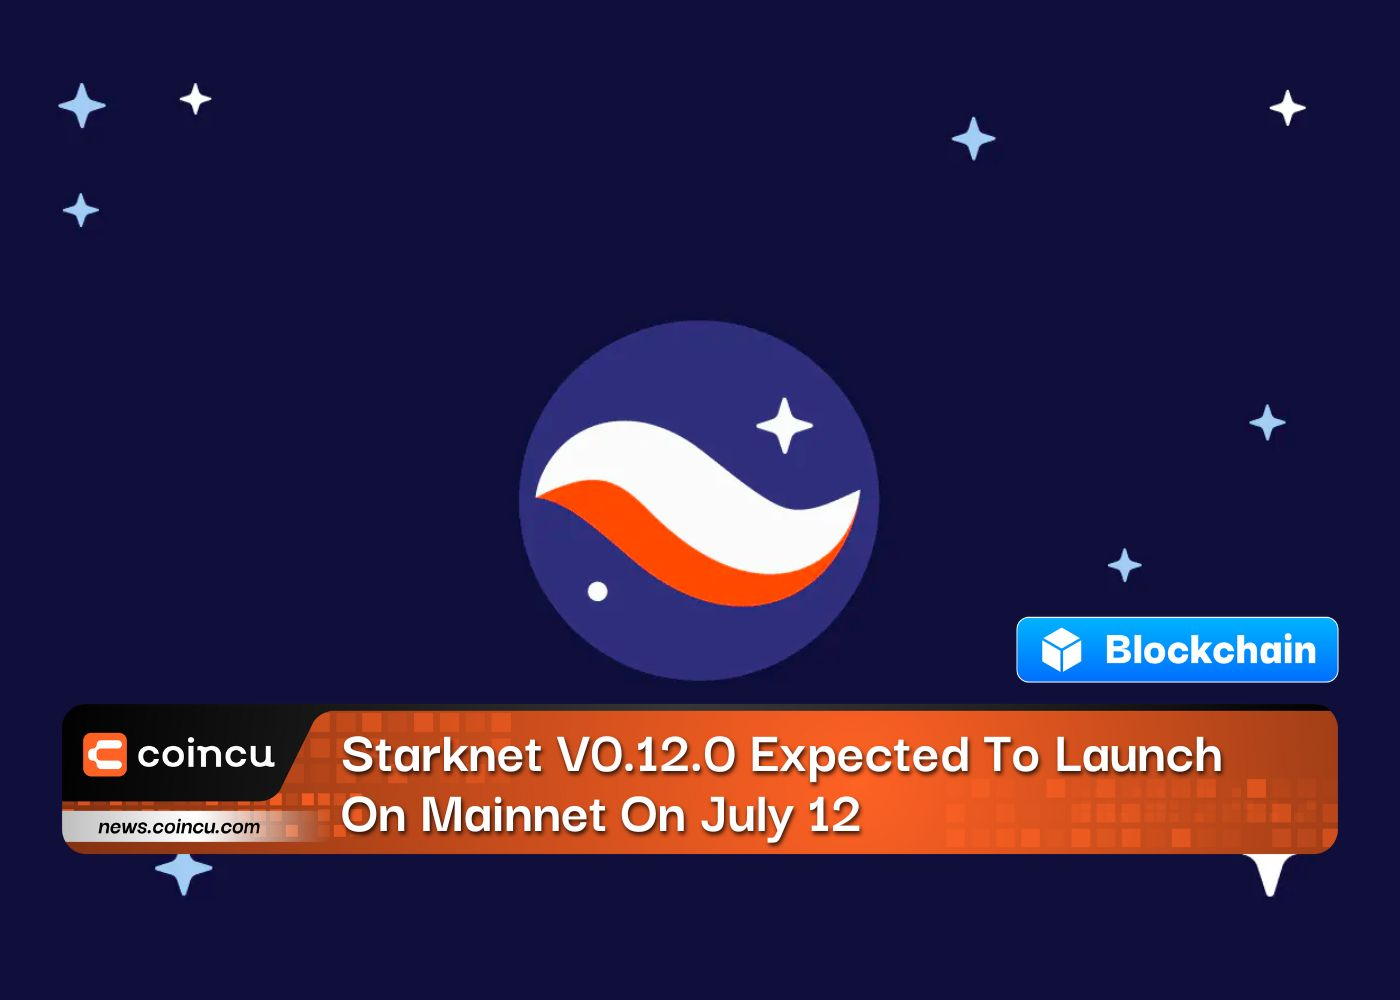 Starknet V0.12.0 Expected To Launch On Mainnet On July 12